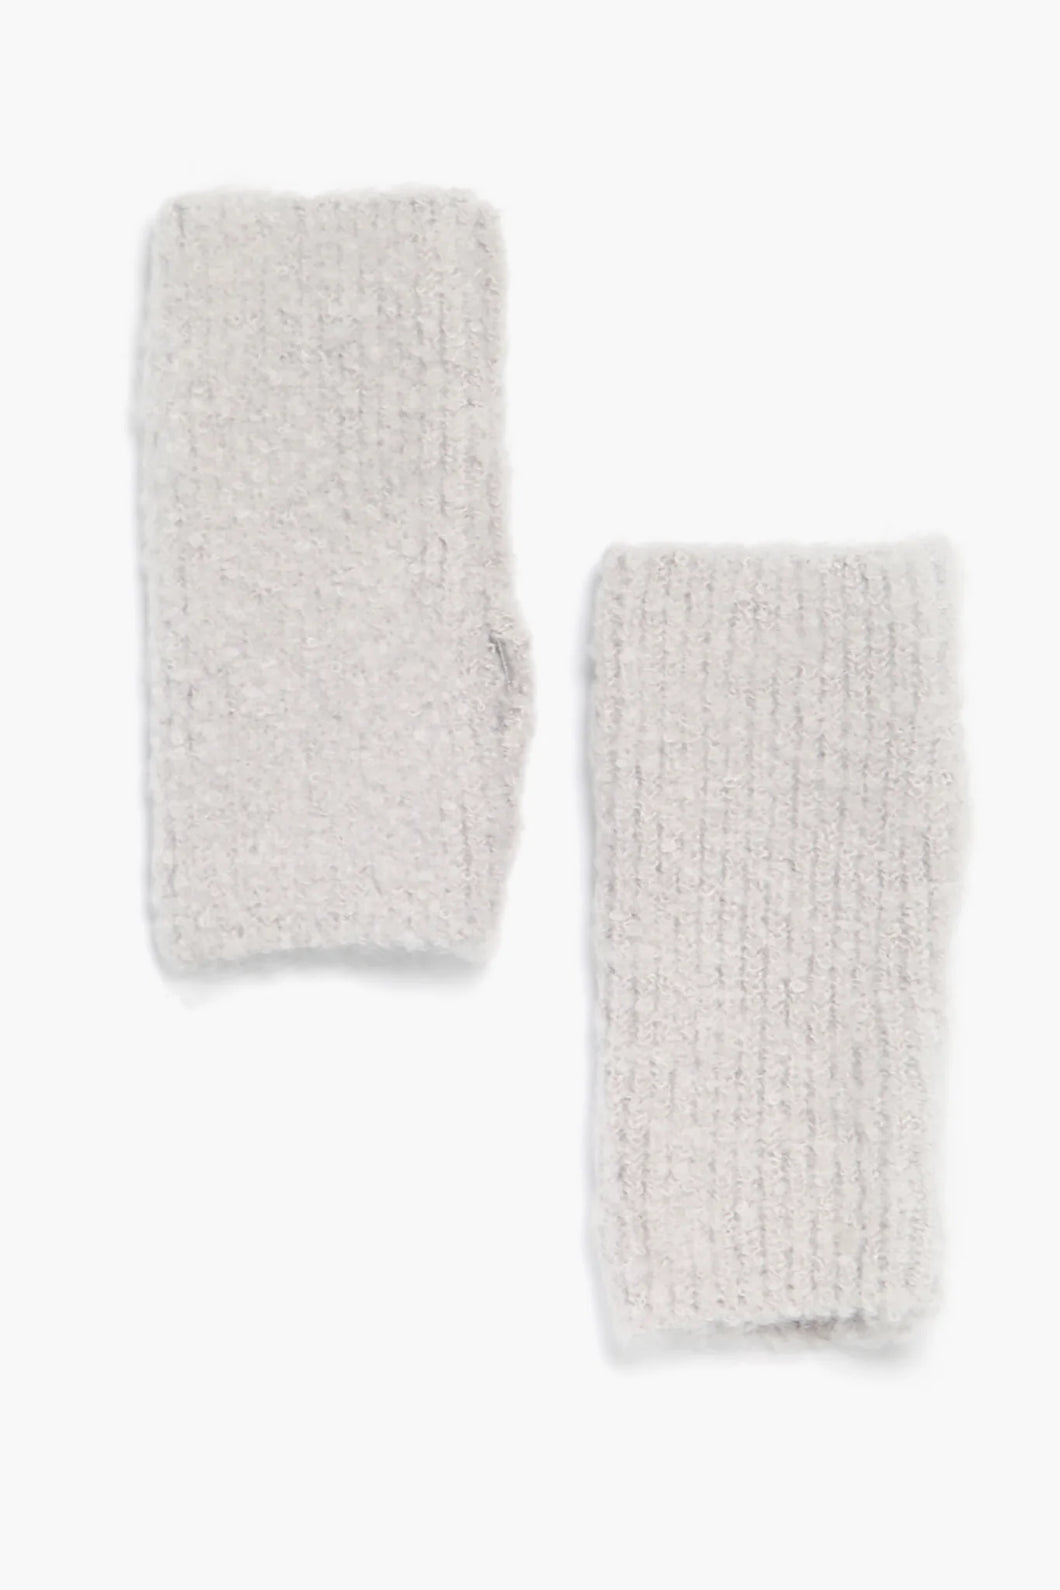 Snuggly warm fingerless gloves with a thumb hole